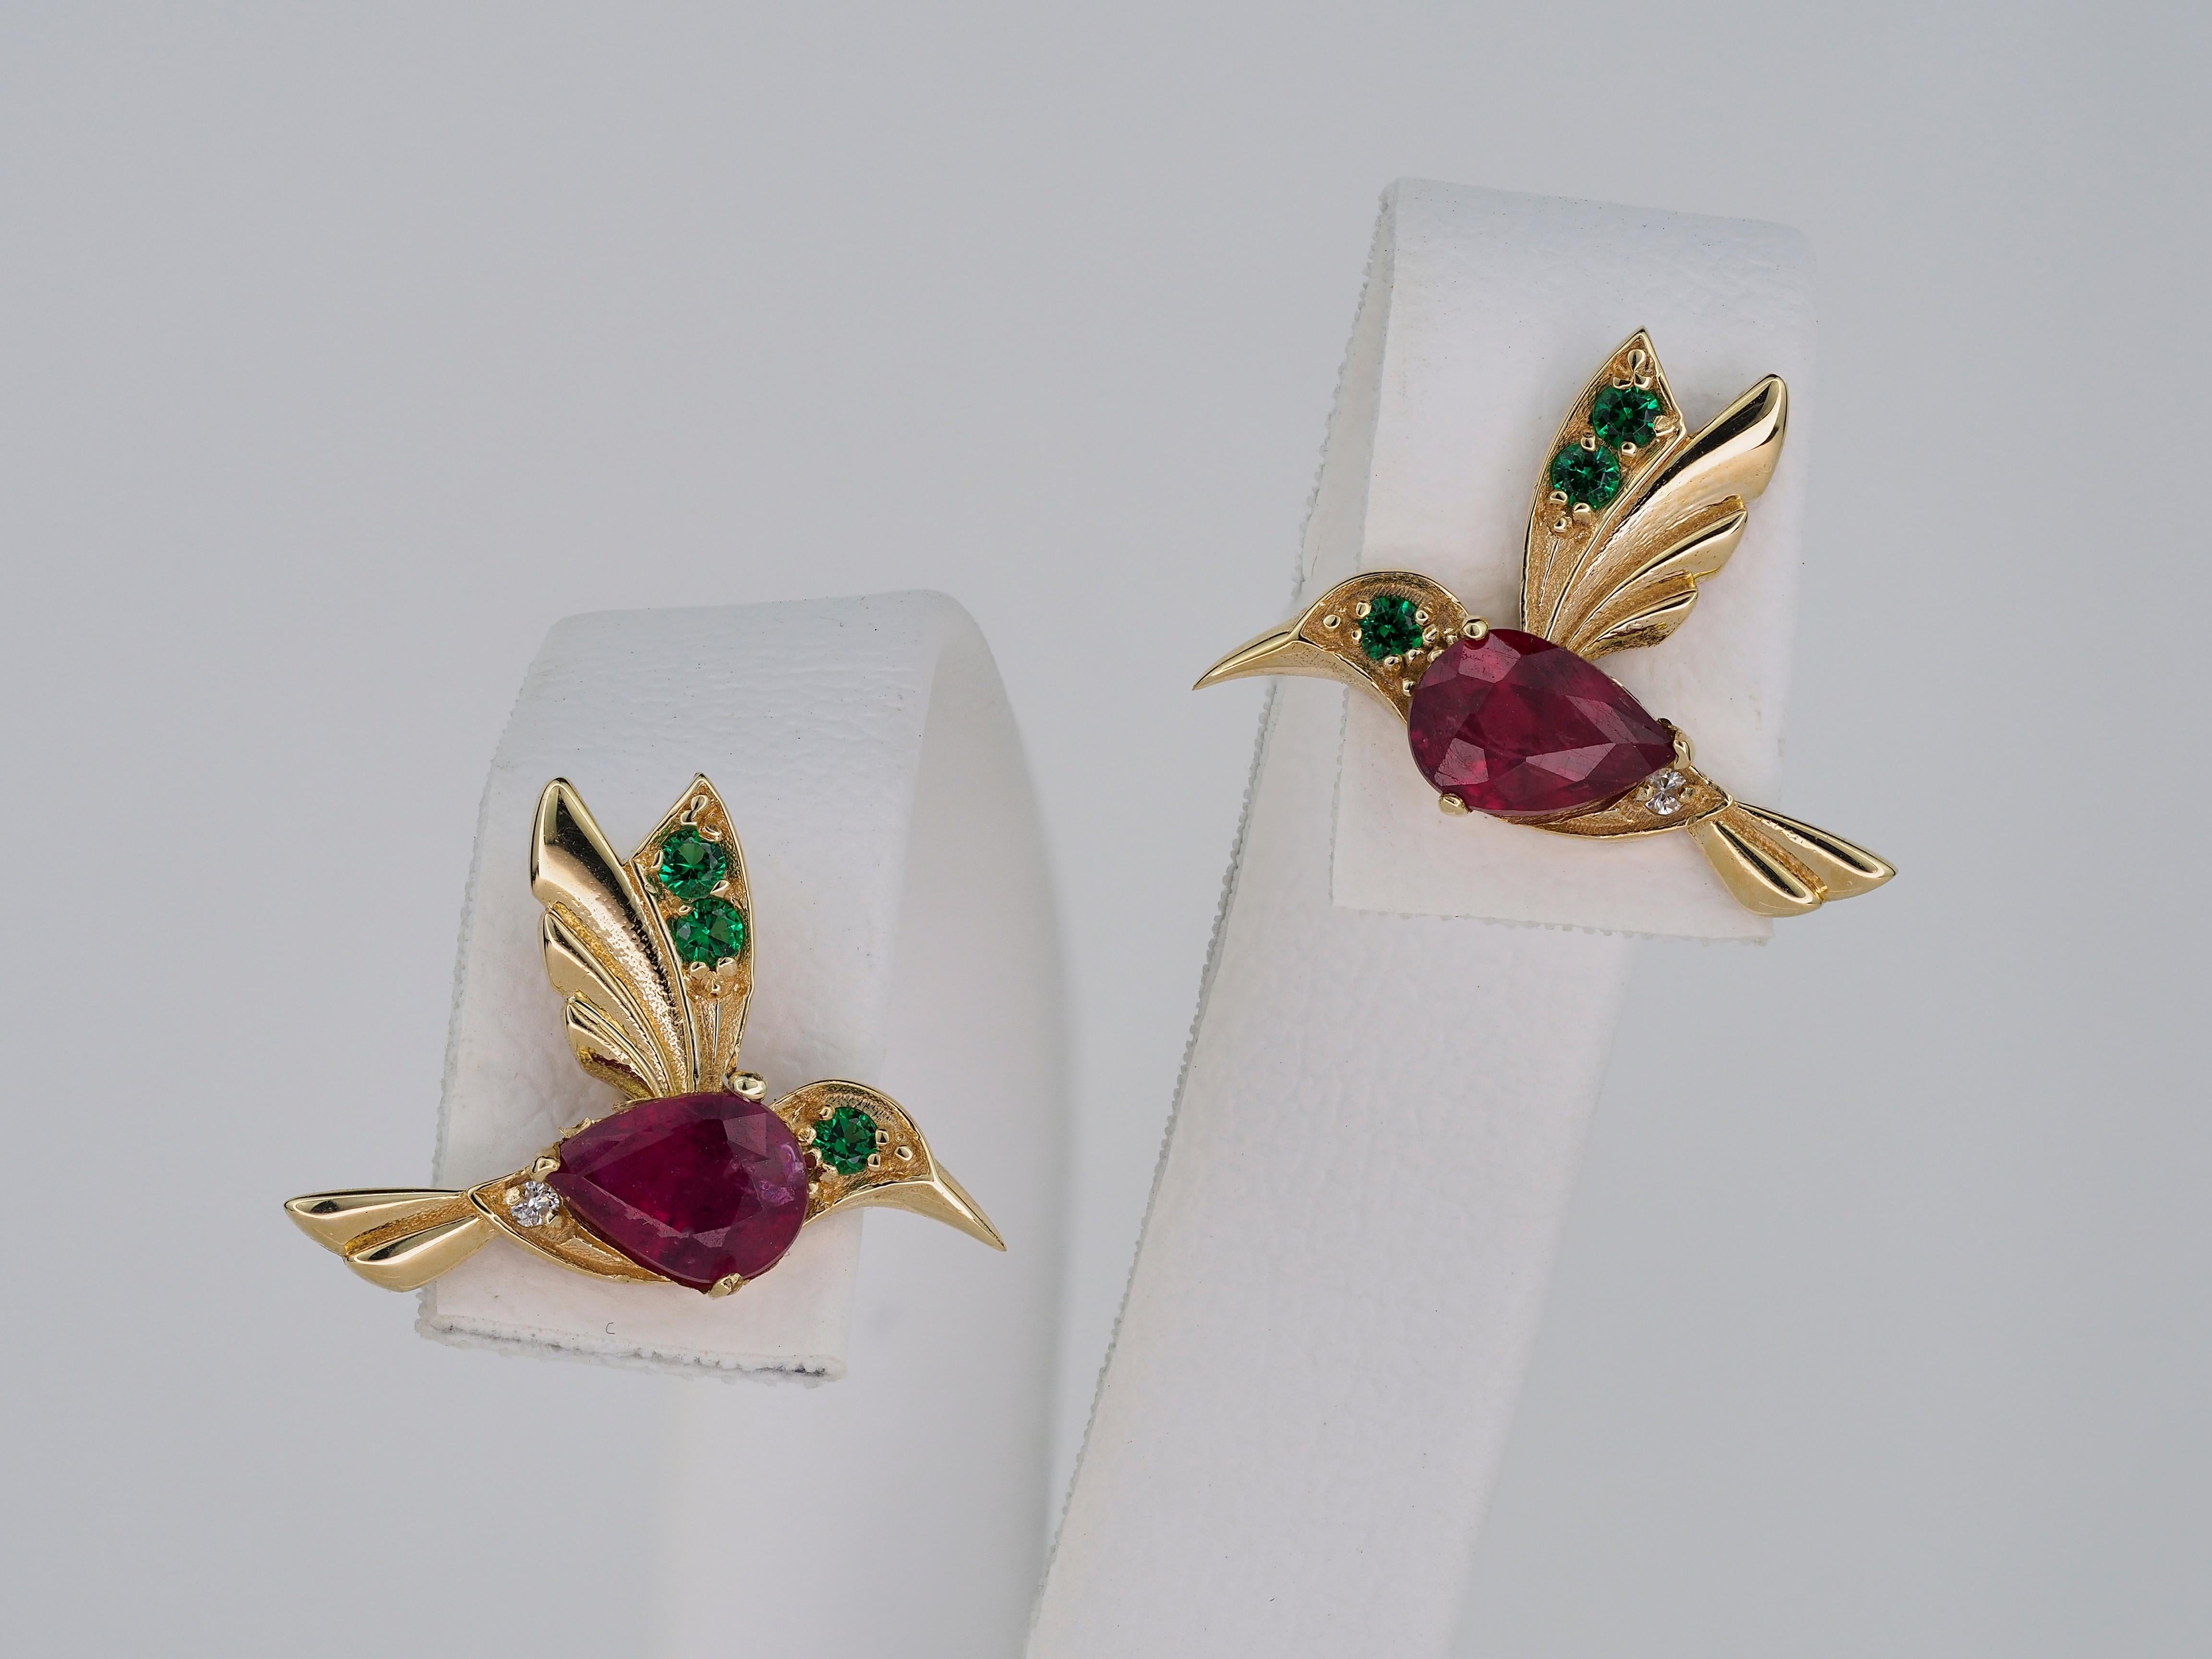 14k Gold Hummingbird Earings Studs with Rubies, Bird Stud Earrings with Gems ! For Sale 4